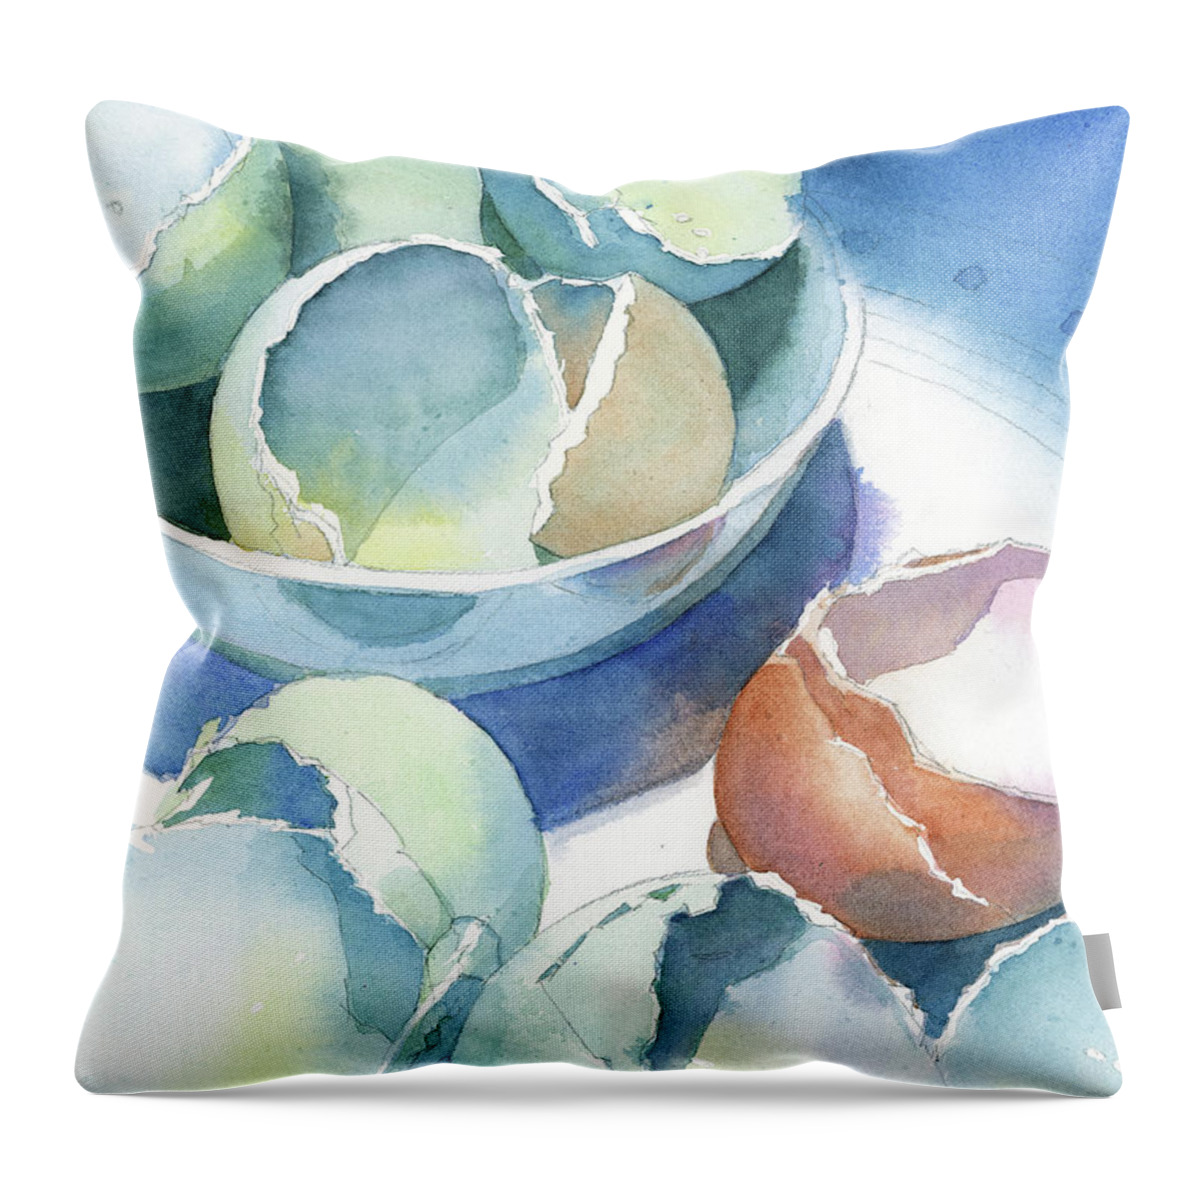 Brunch Throw Pillow featuring the painting Brunch by Lois Blasberg